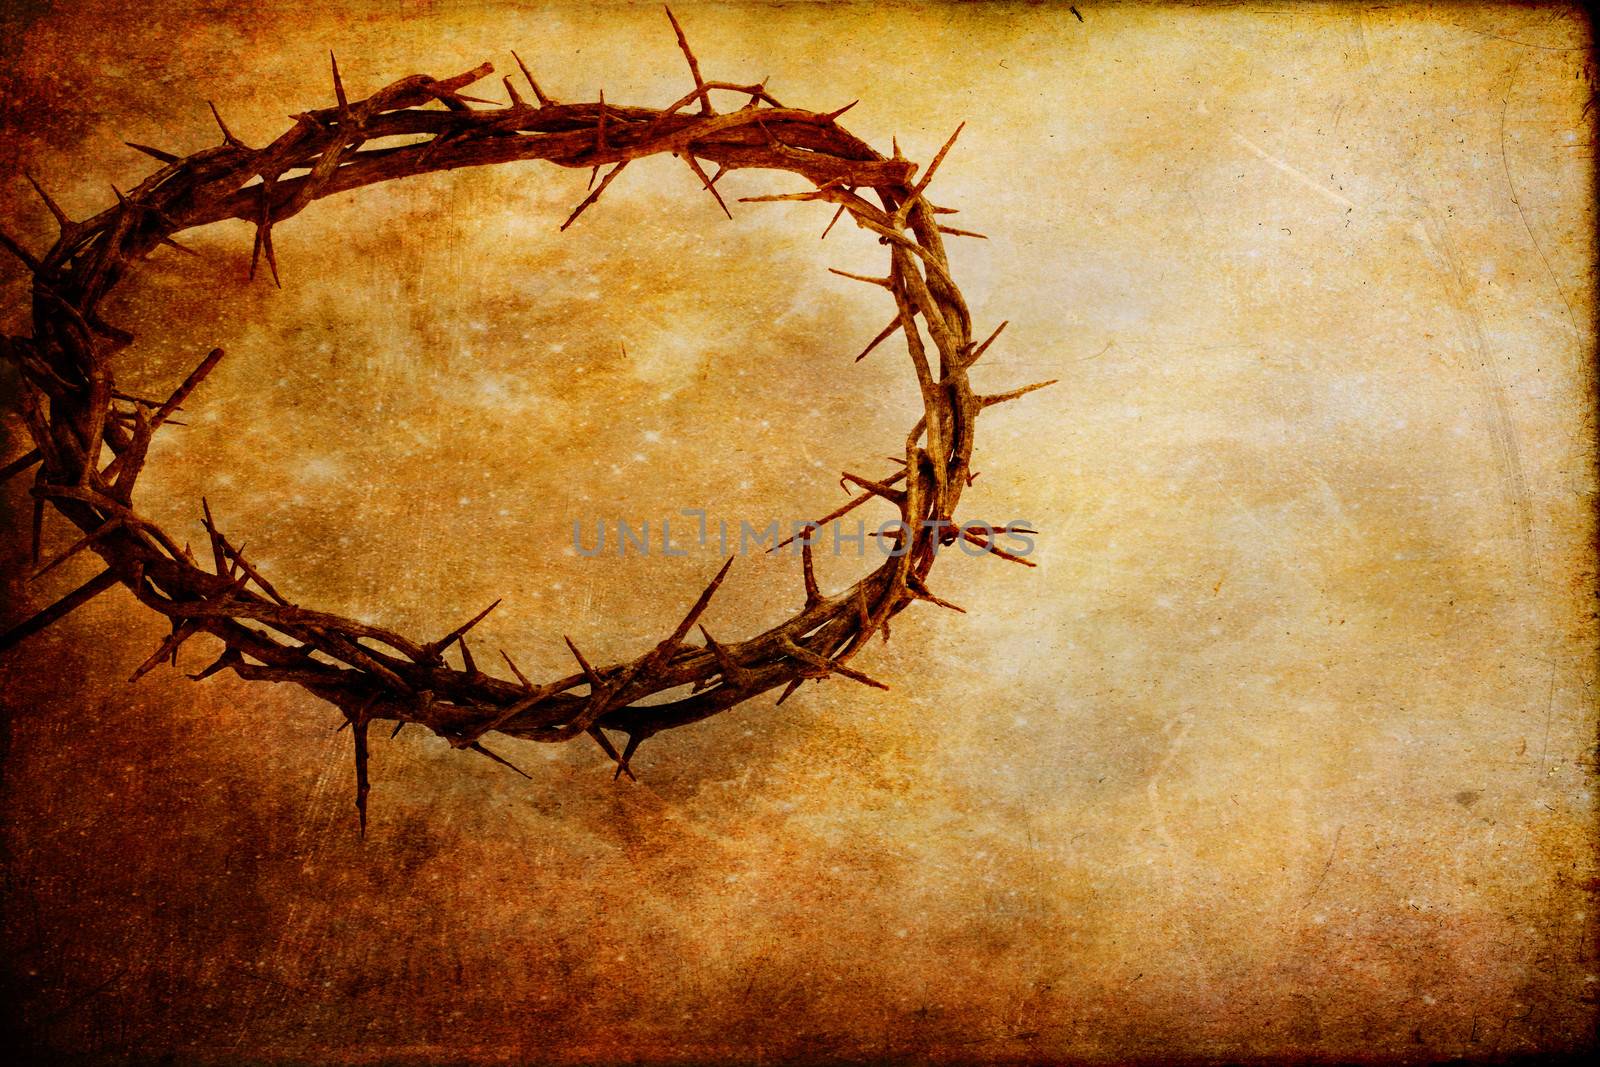 Crown of thorns over textured background with copy space.